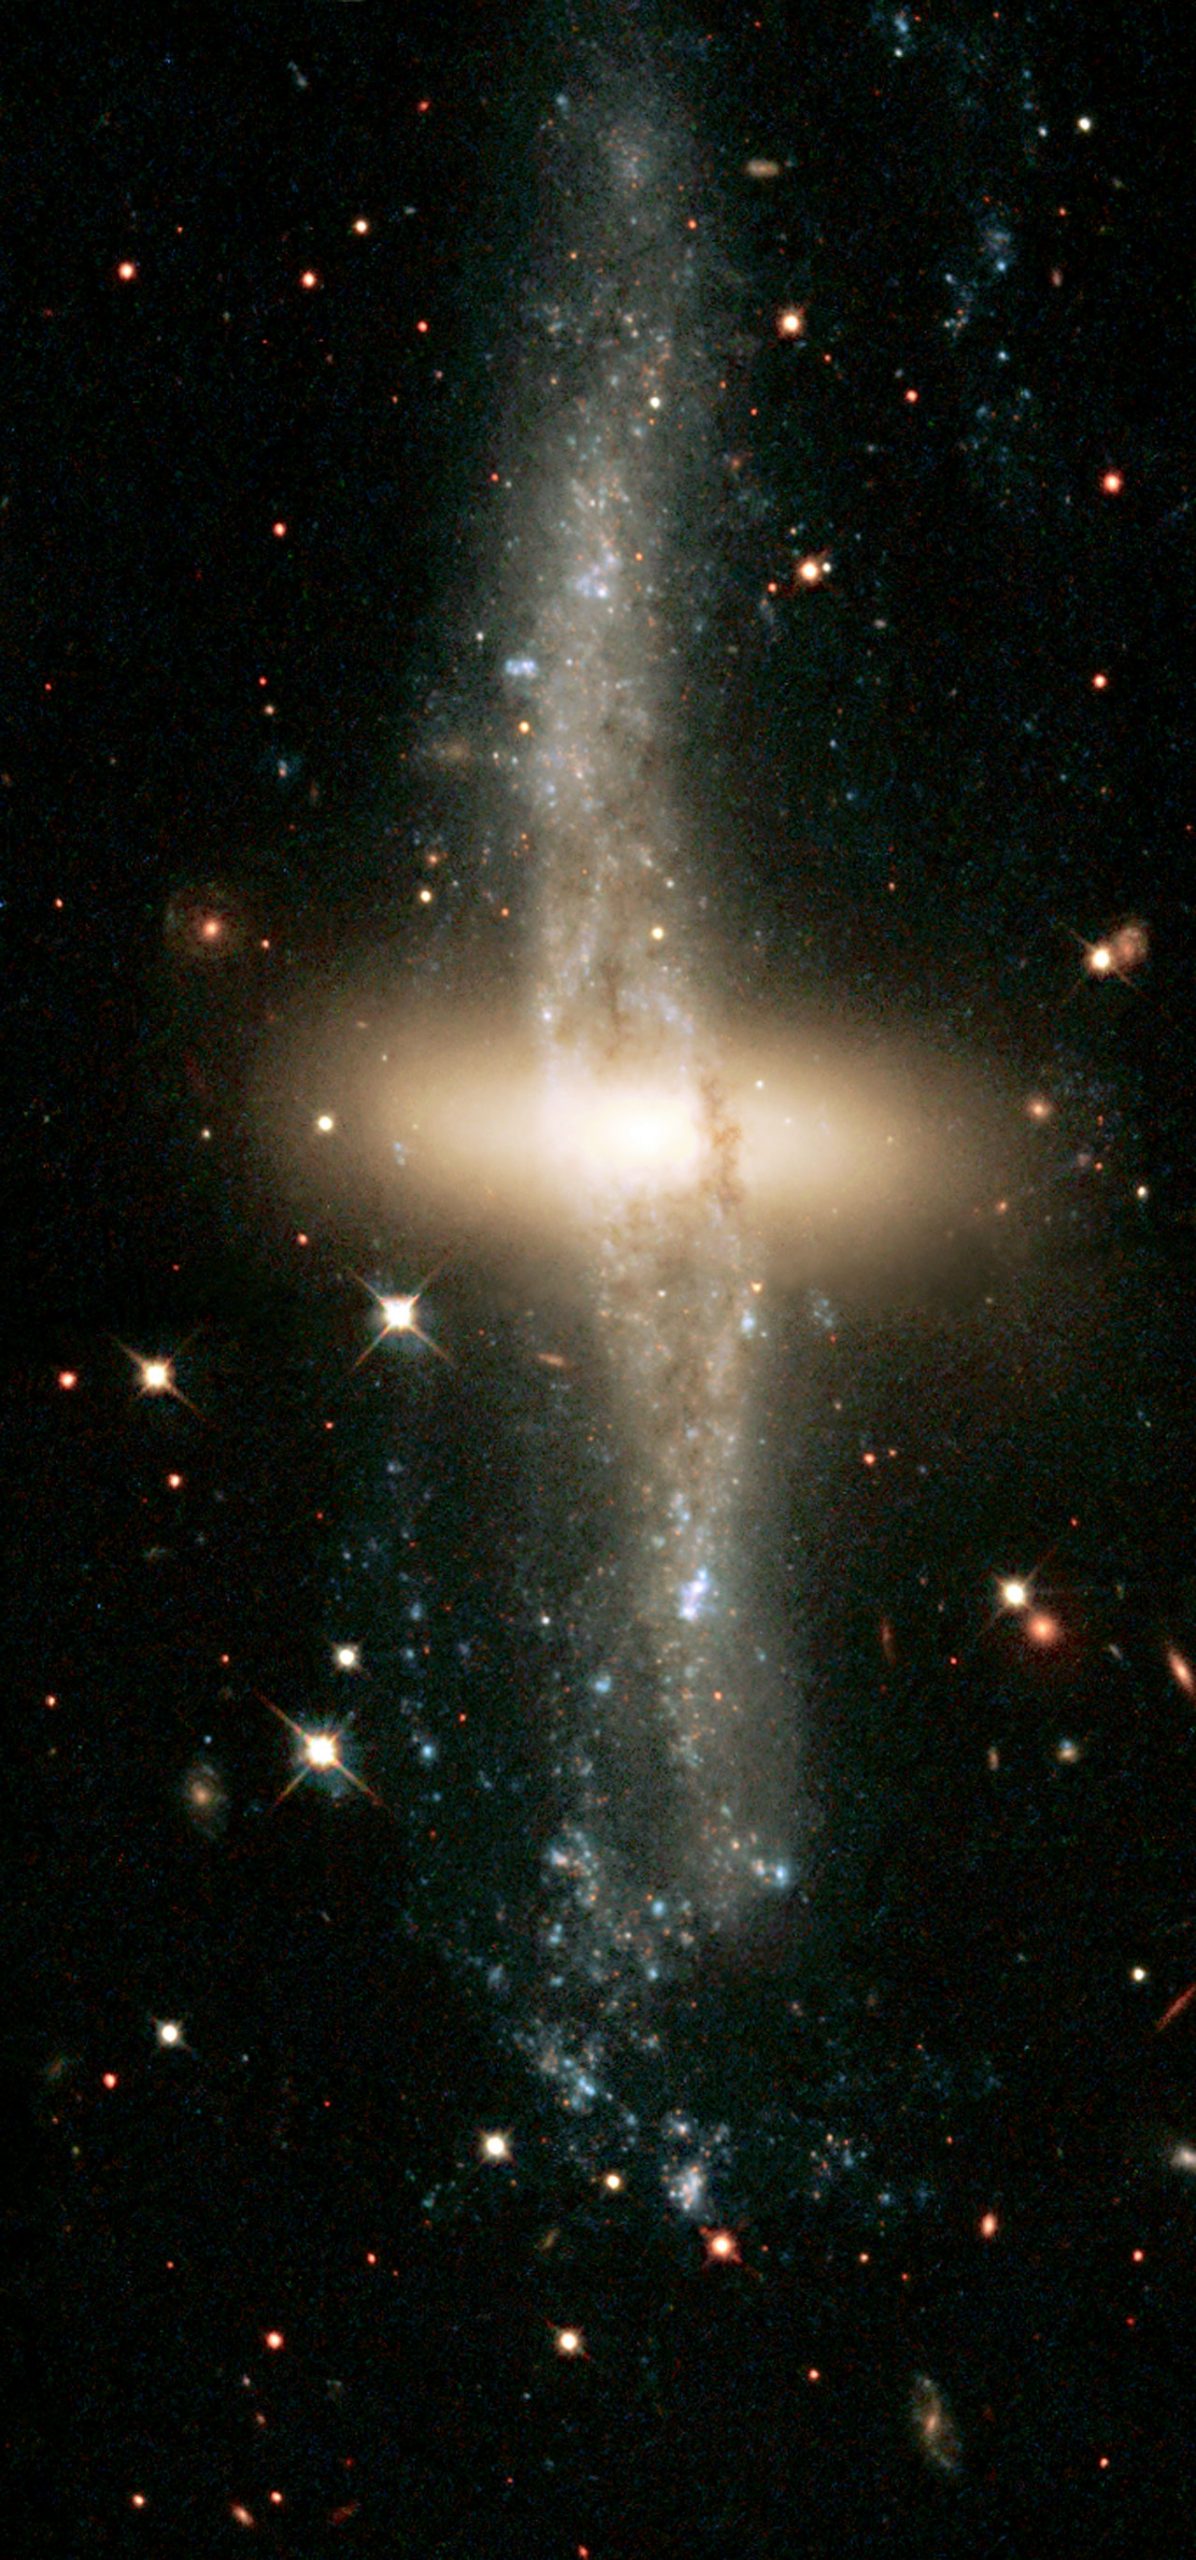 One of only 100 known galaxies with polar rings, NGC 4650A is located about 130 million light-years away. Credit: The Hubble Heritage Team (AURA/STScI/NASA/ESA).